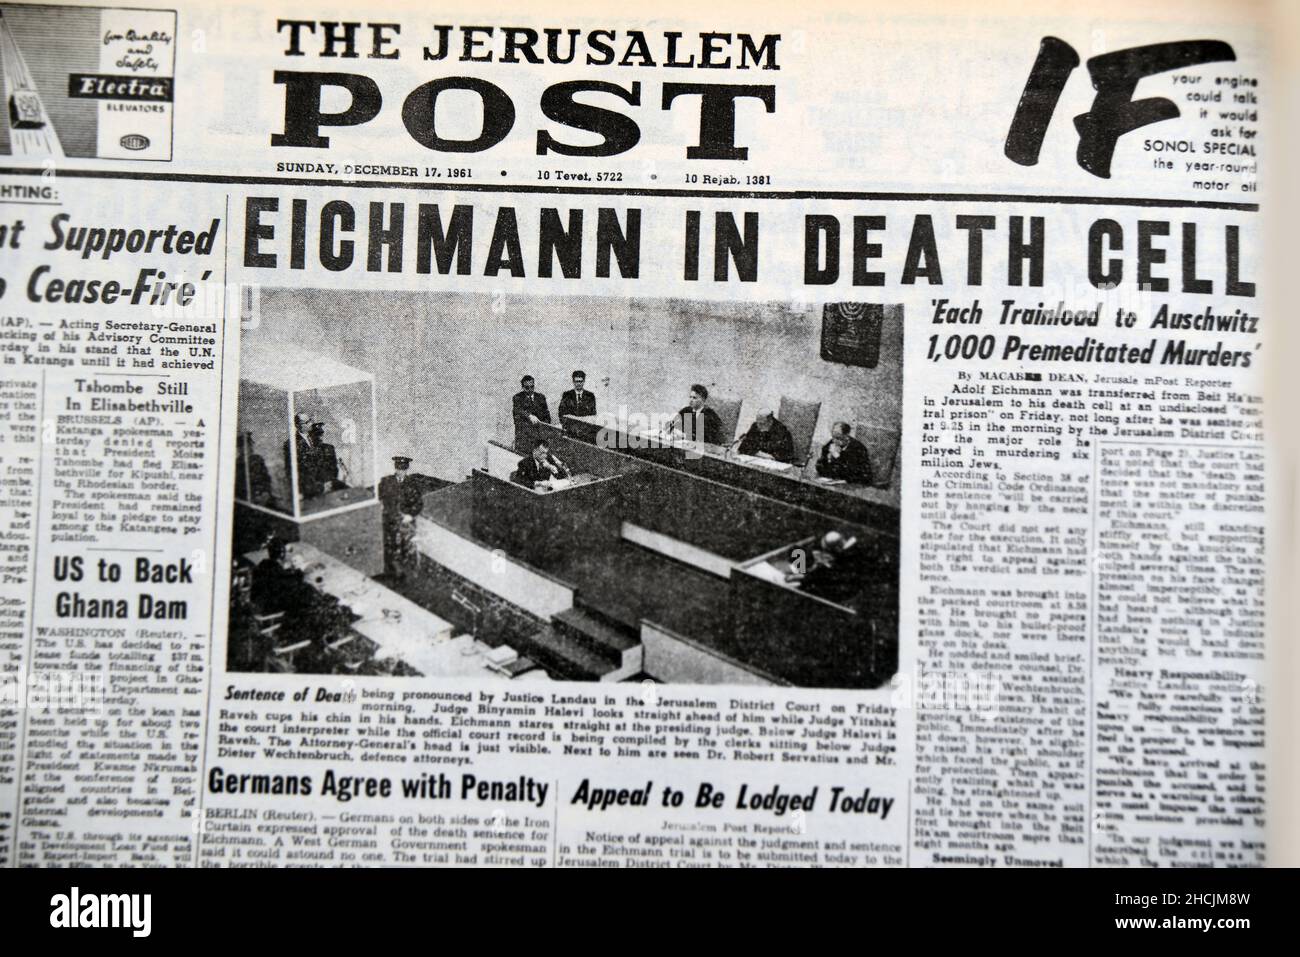 Headline from Israeli newspaper featuring an historical event - Eichmann in death cell; 1961 Stock Photo